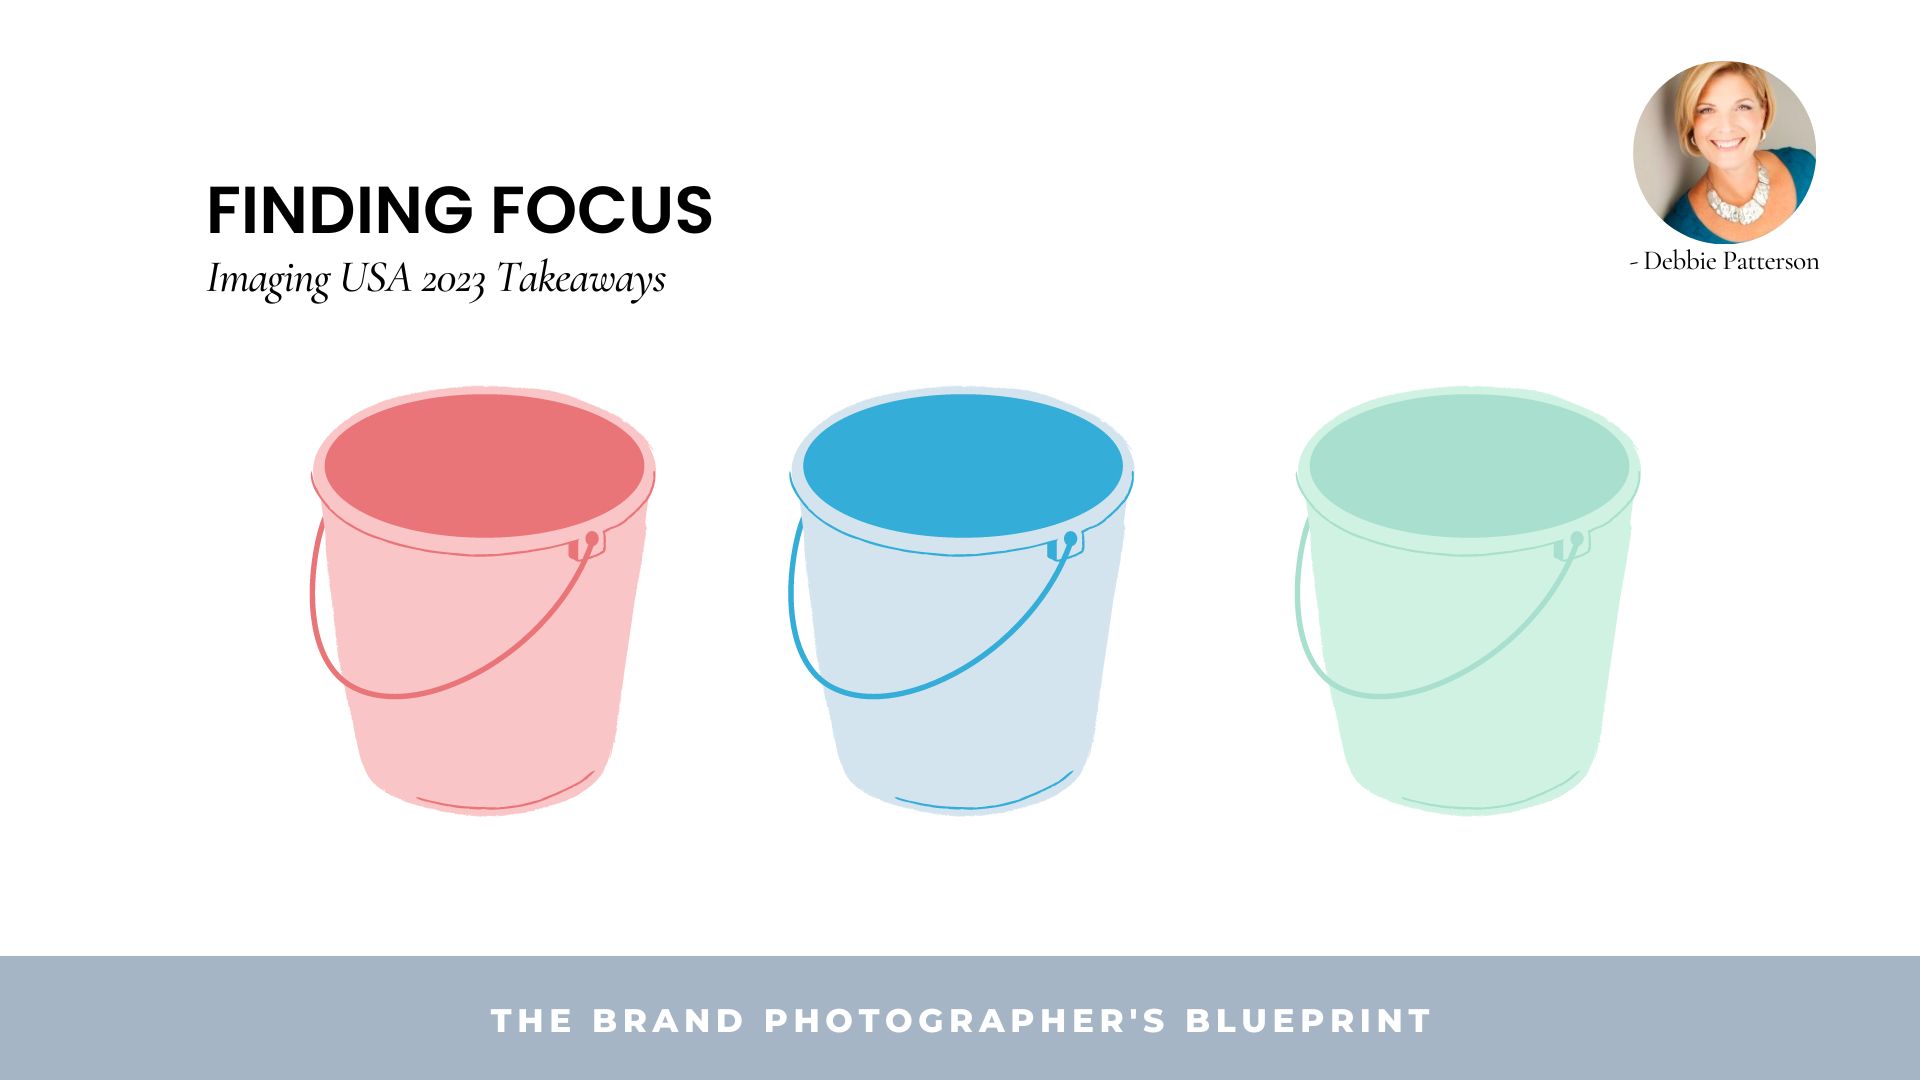 graphic of debbie patterson's focus method to help you figure out what your next step should be - shows 3 buckets, one red, one blue, and one green.